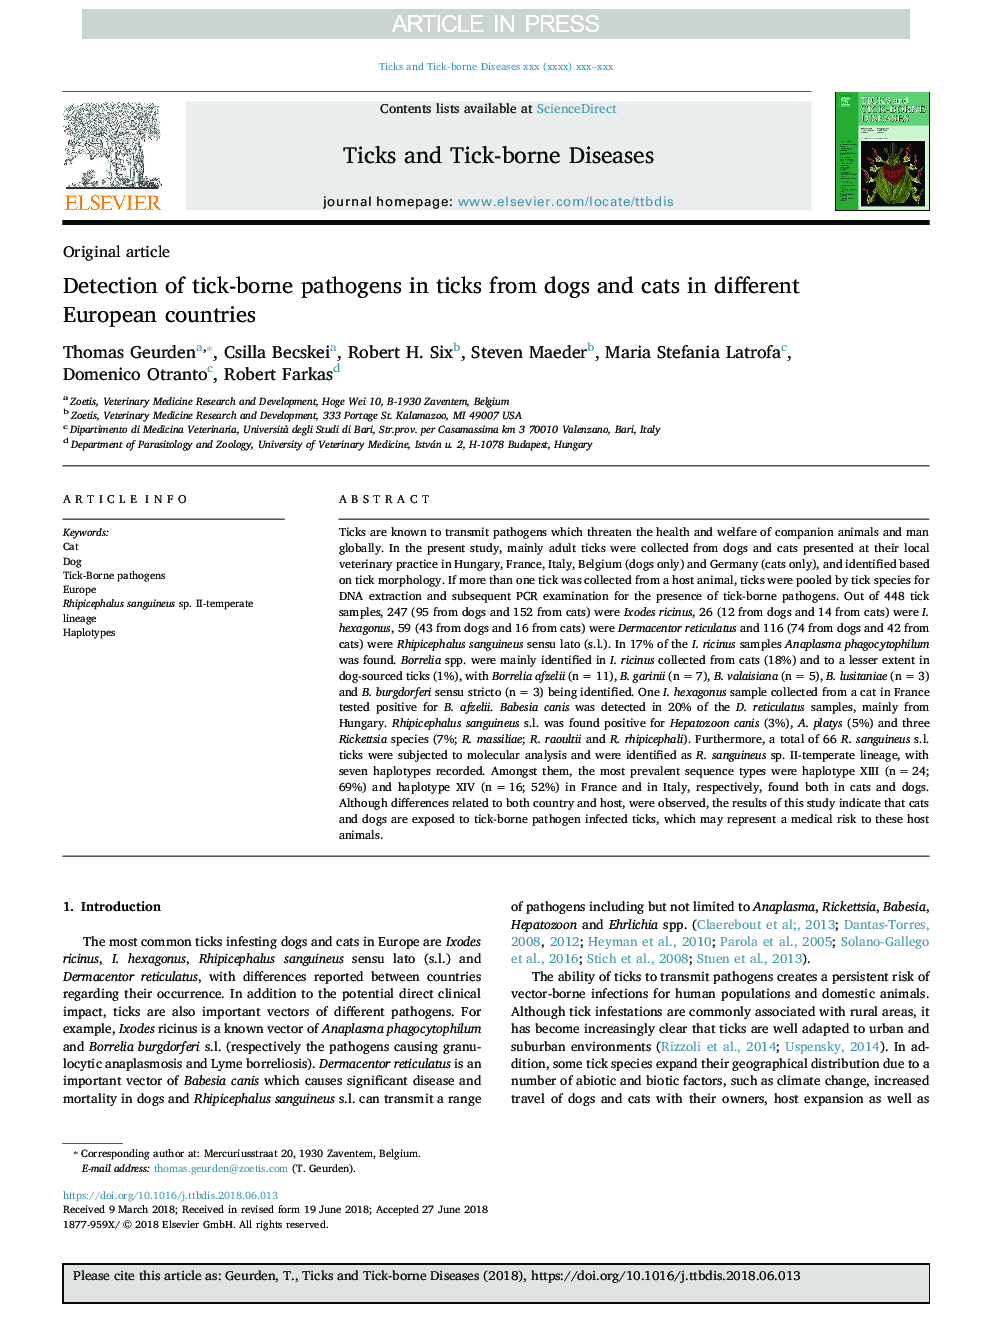 Detection of tick-borne pathogens in ticks from dogs and cats in different European countries